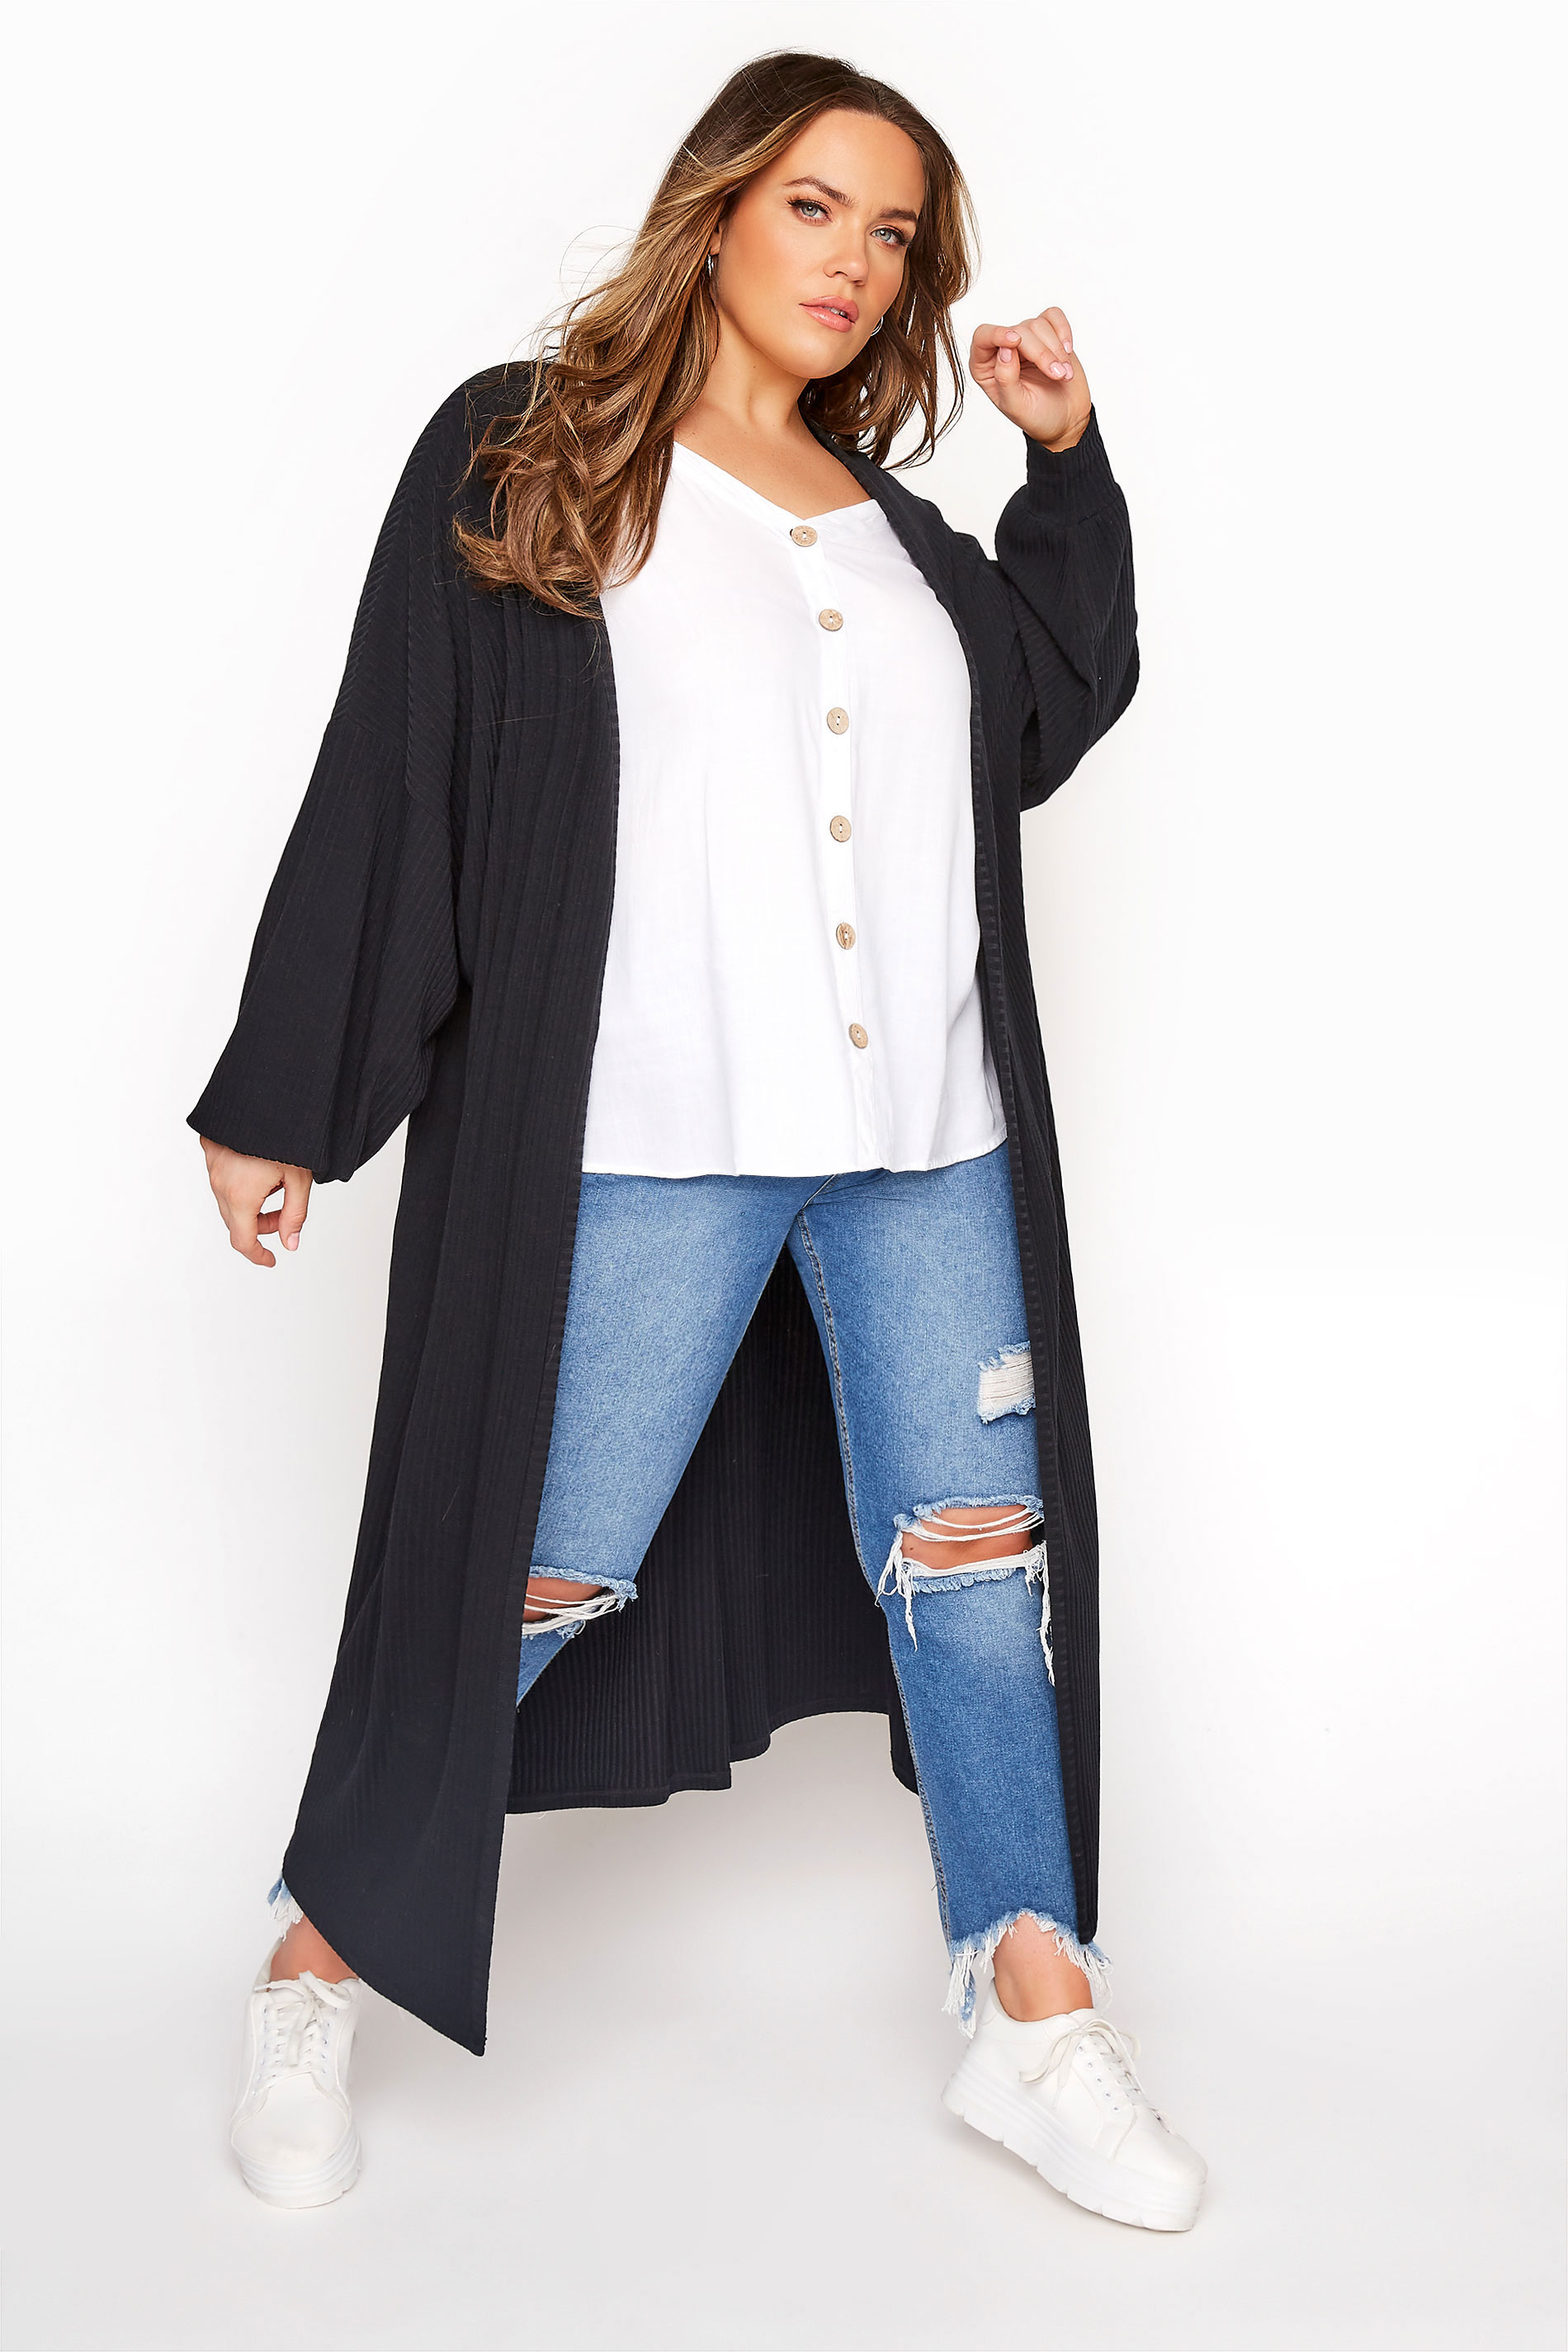 LIMITED COLLECTION Black Maxi Cardigan_A.jpg